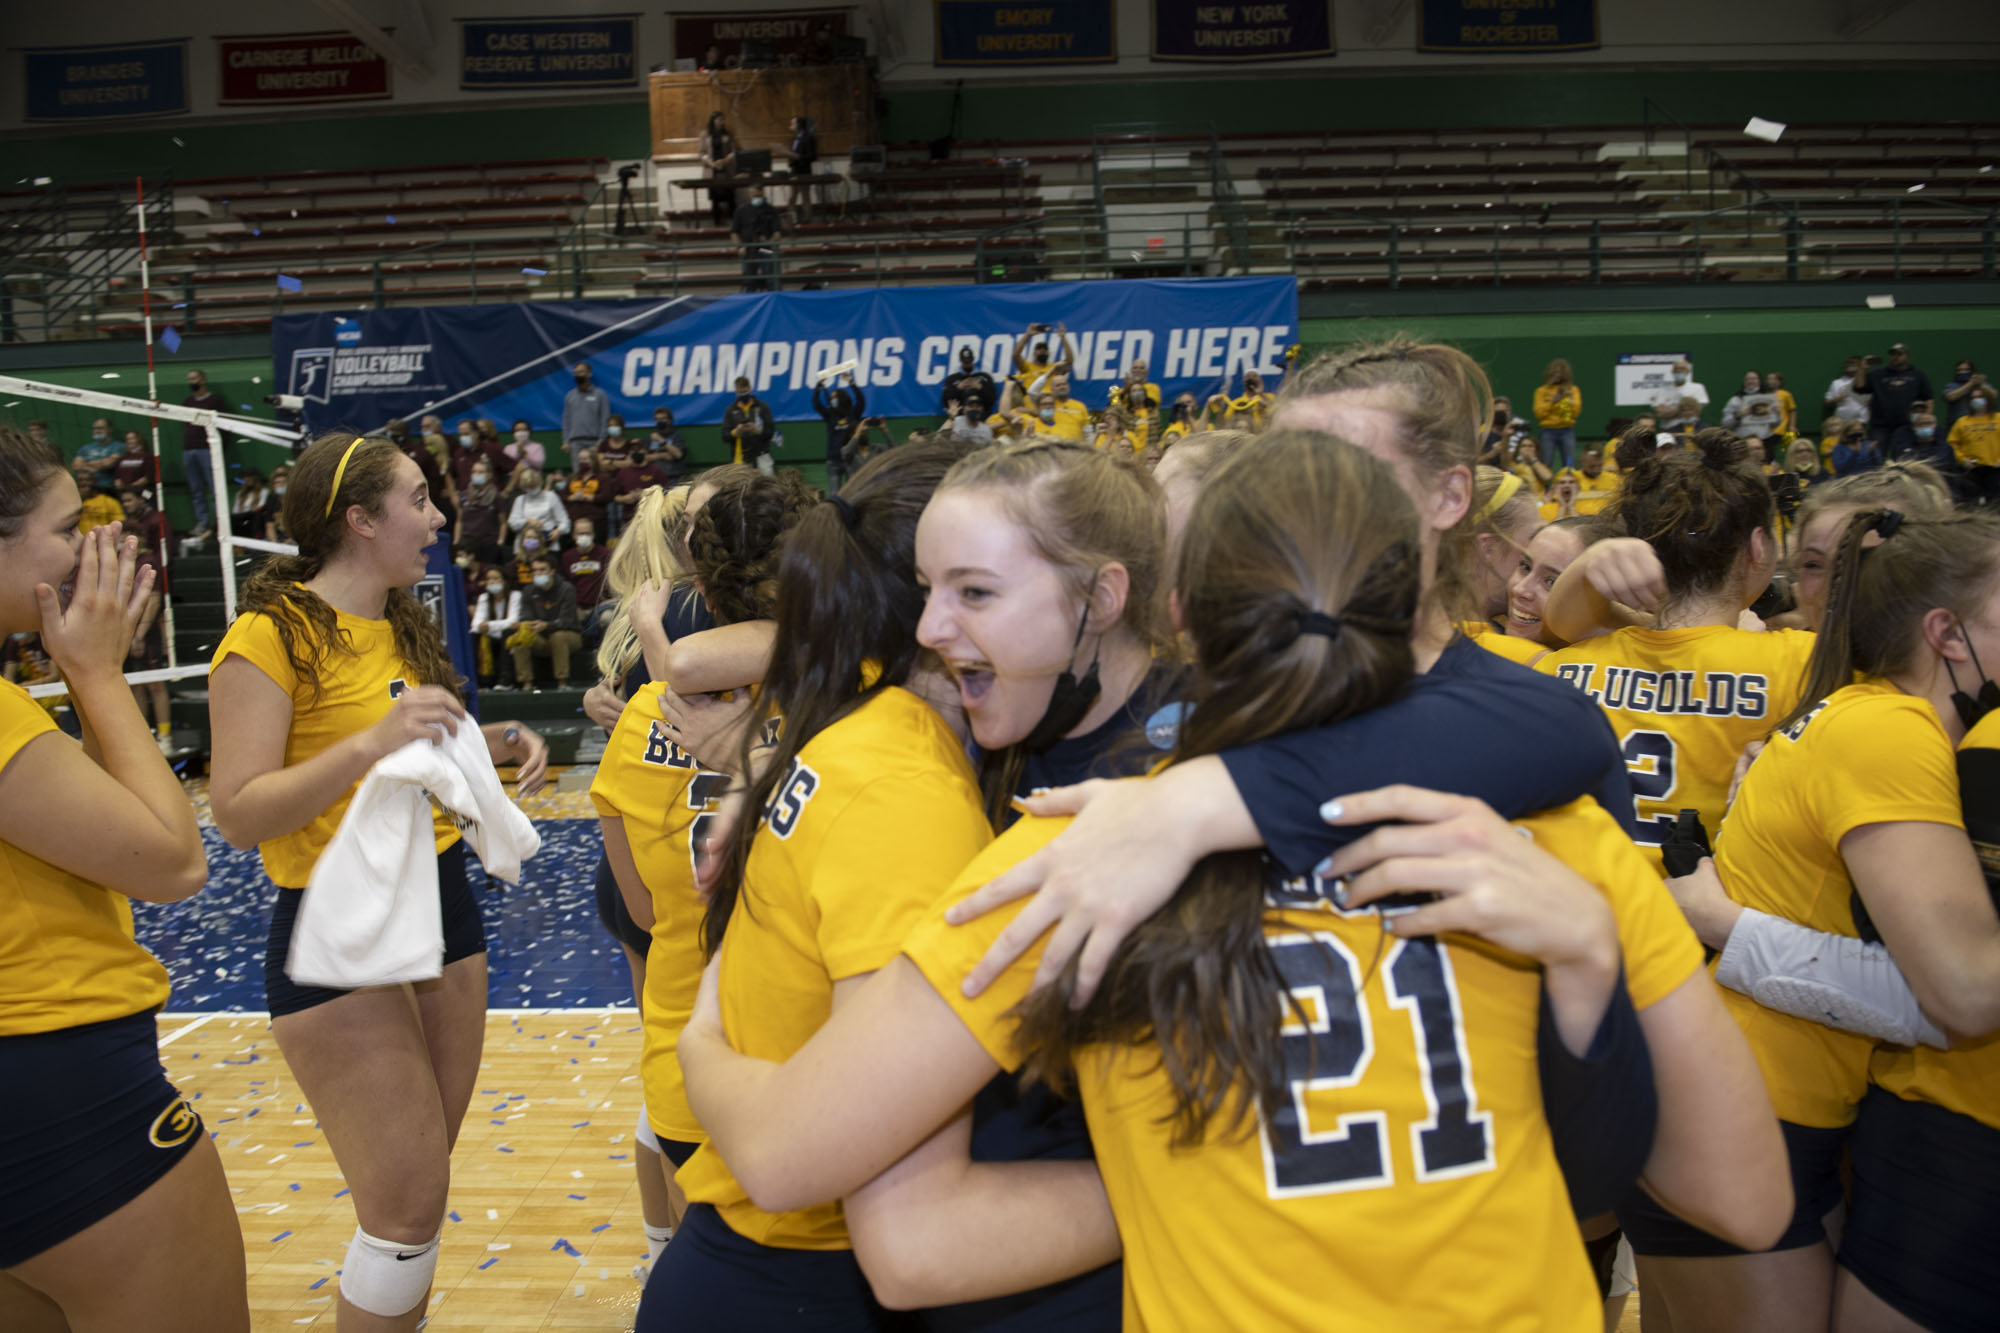 UW-Eay Claire volleyball team members hug after winning the Division III national championship